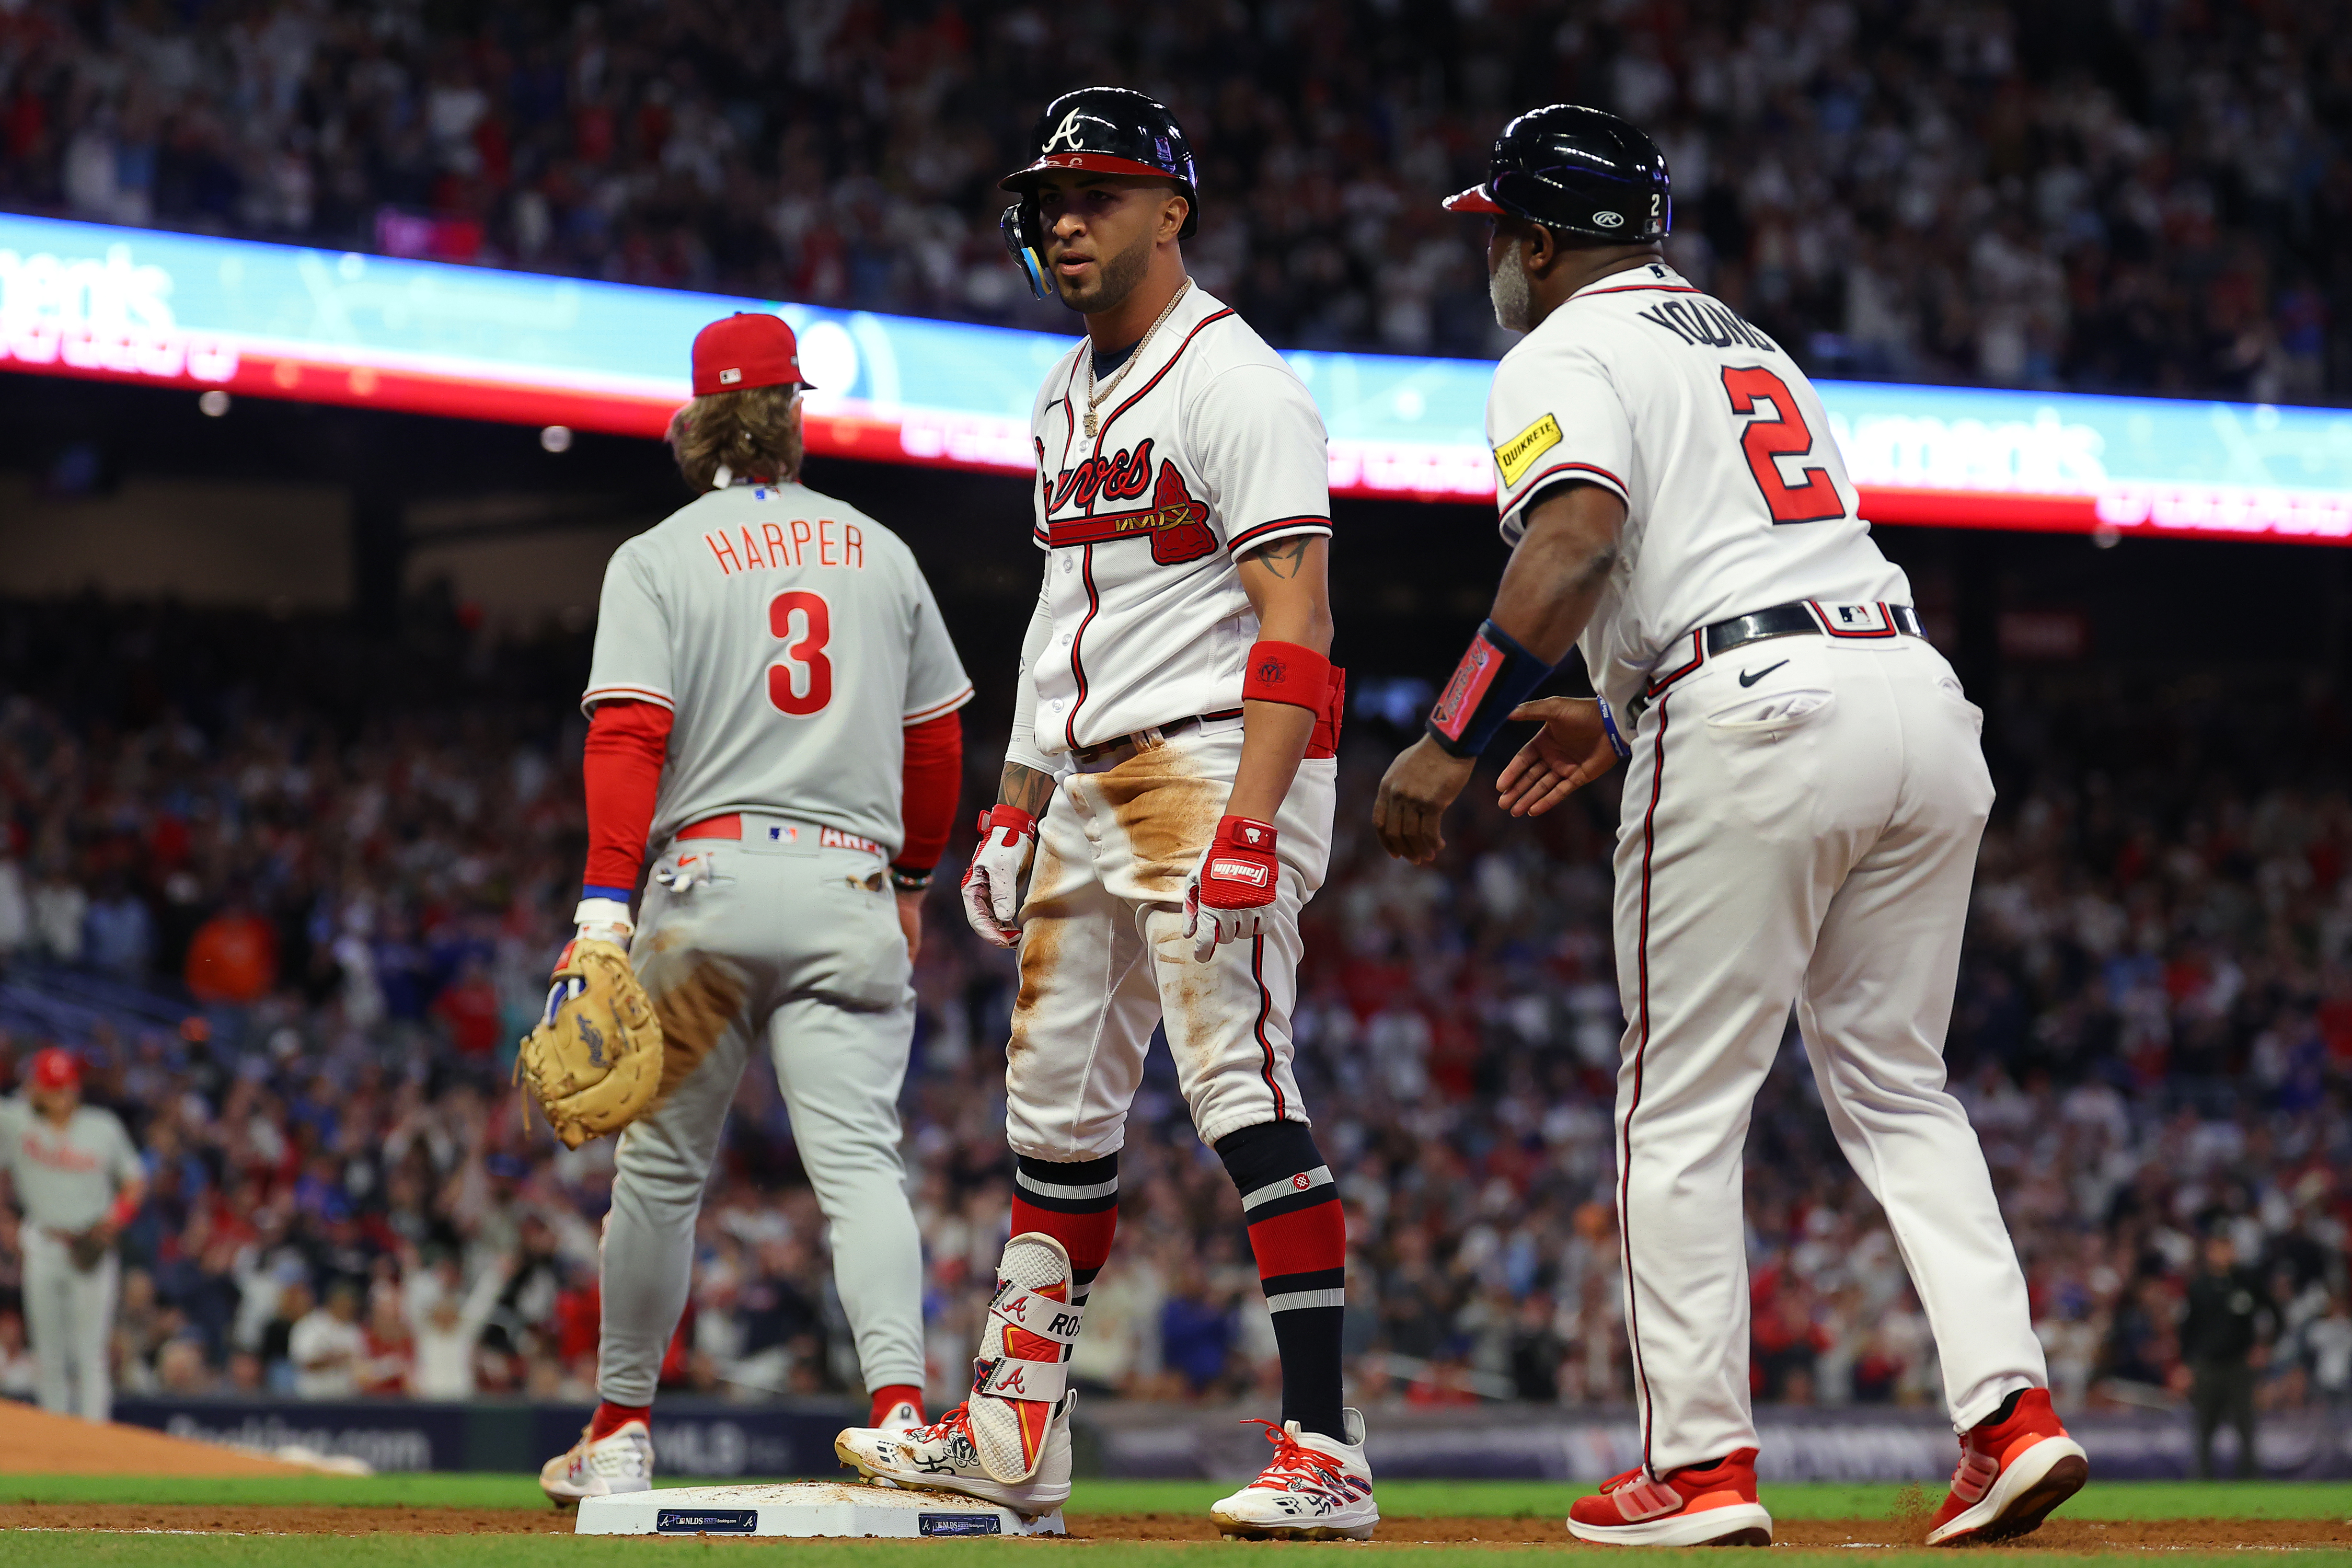 Unlikely hero, 2 HRs carry Braves to brink of World Series title